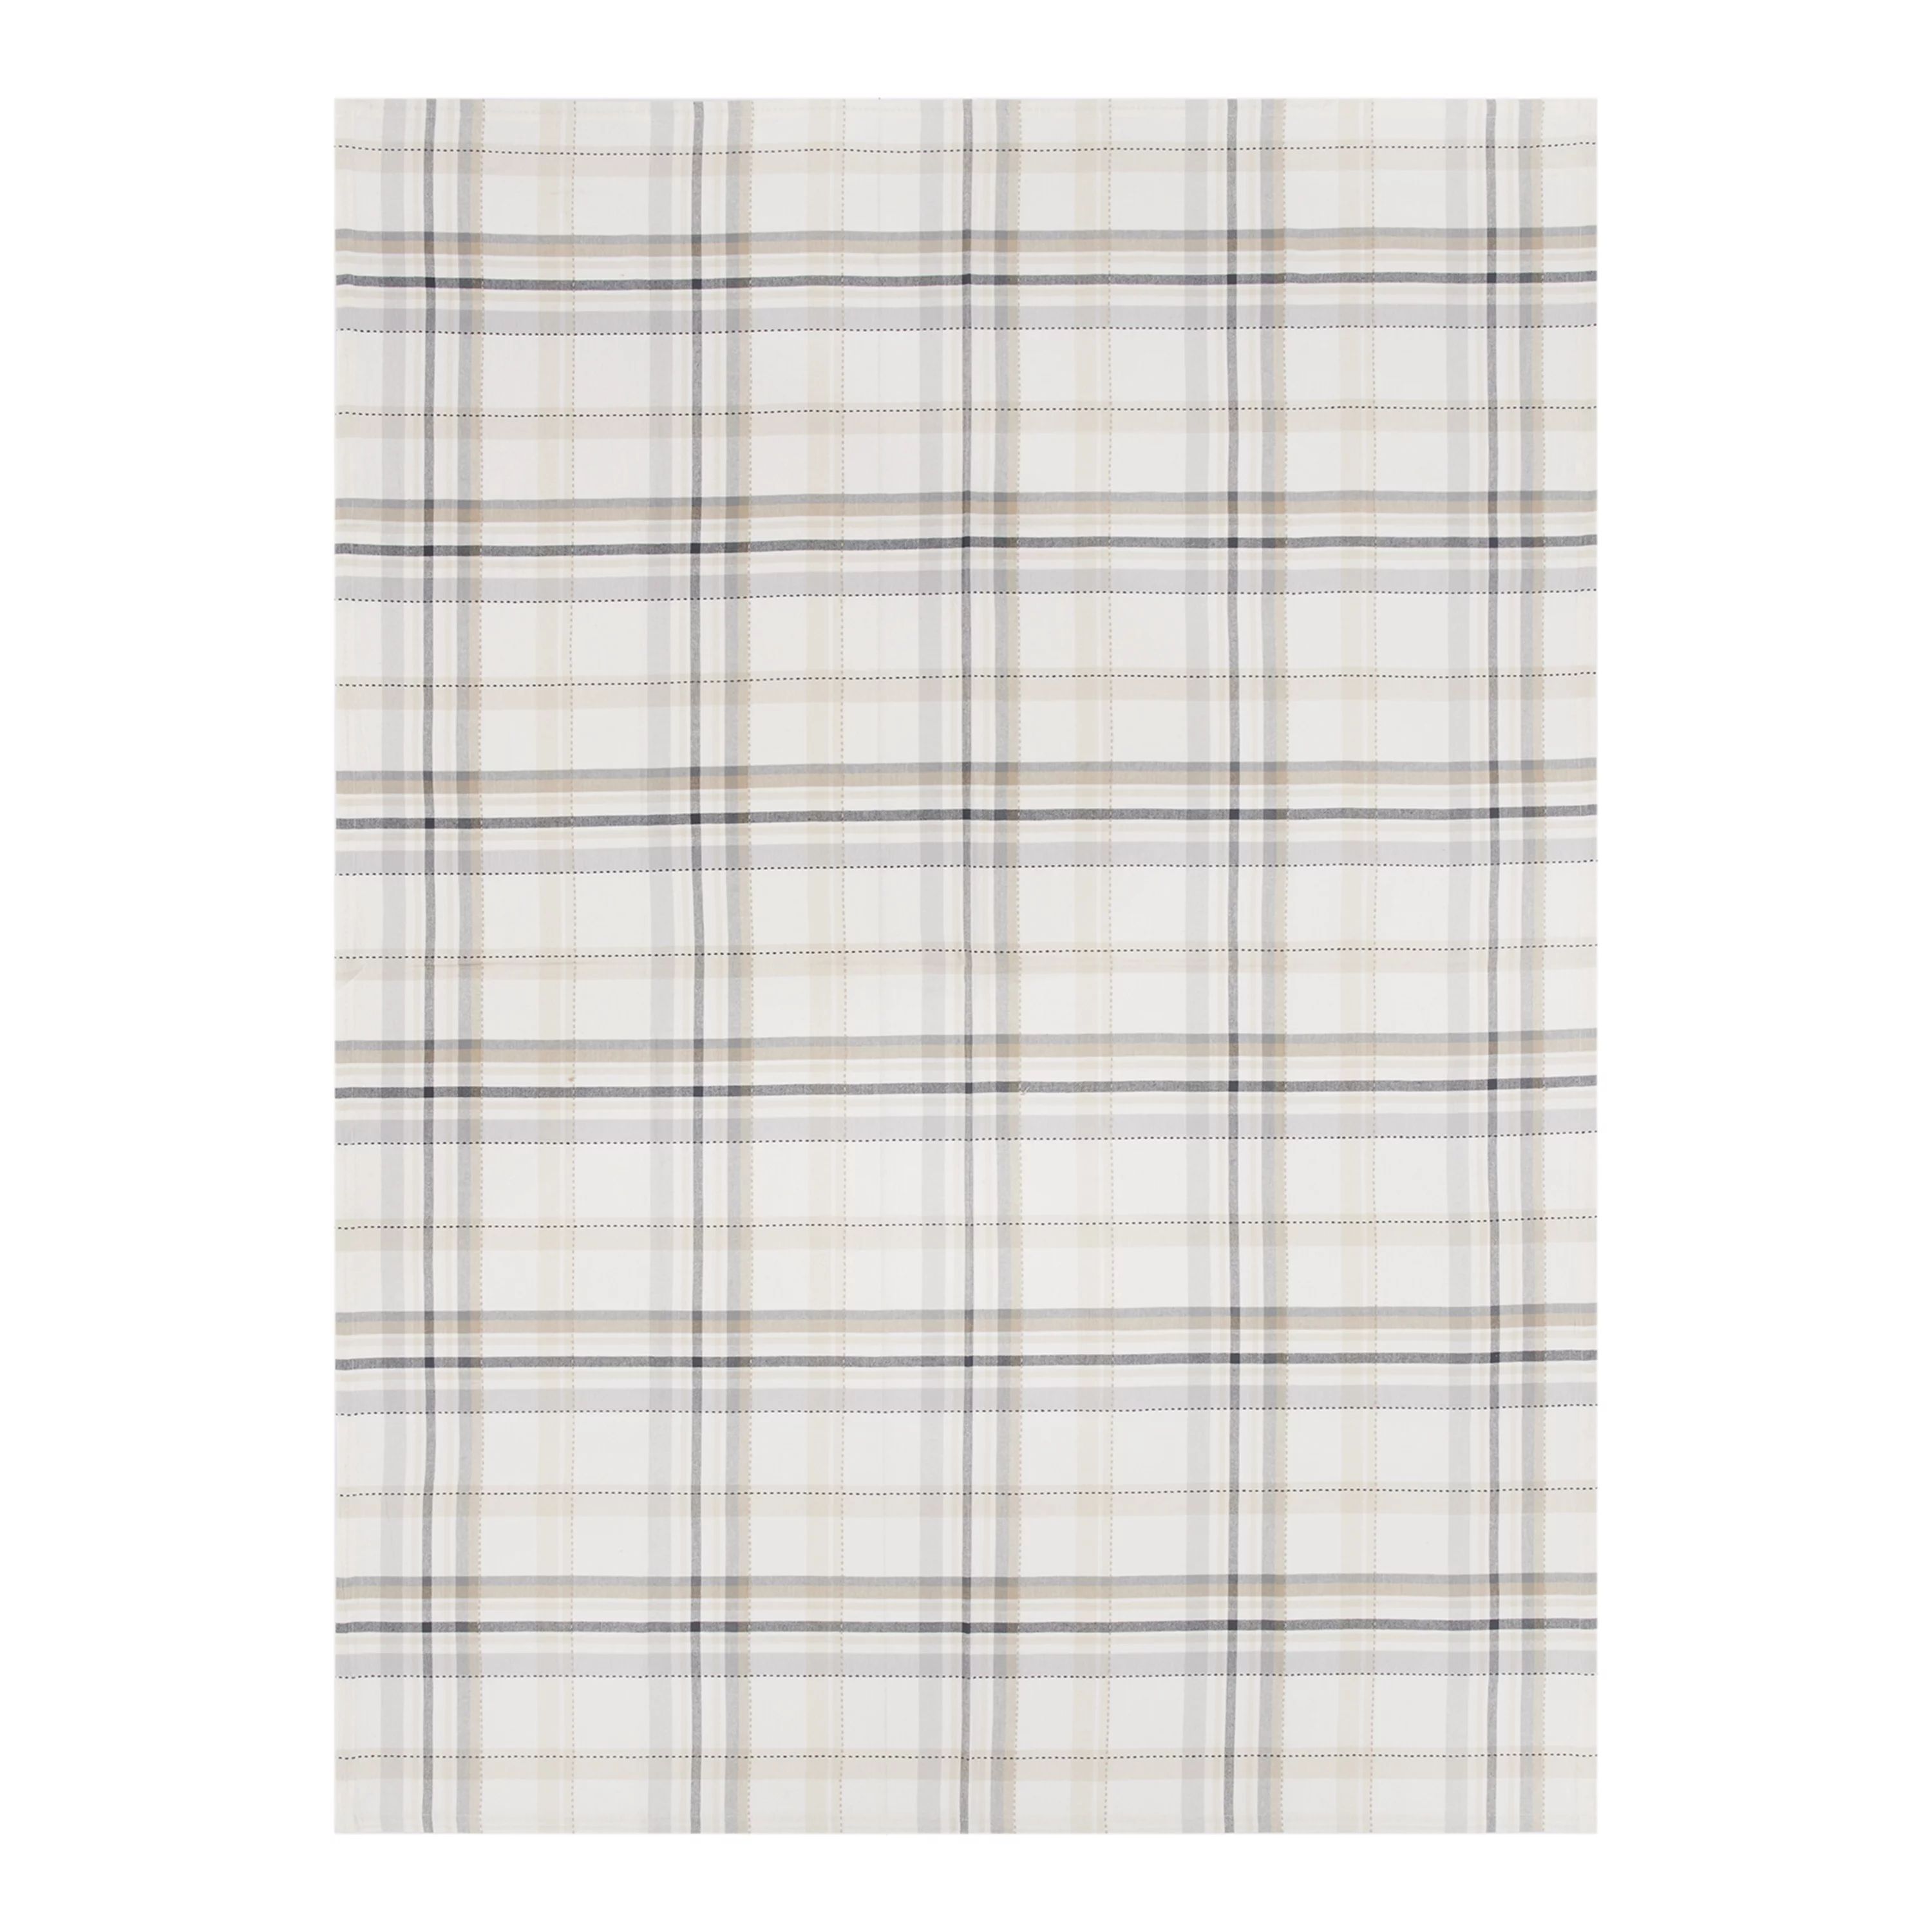 Better Homes and Gardens Woven Monday Plaid Table Cloth - Multi color - 60"x 84" | Walmart (US)